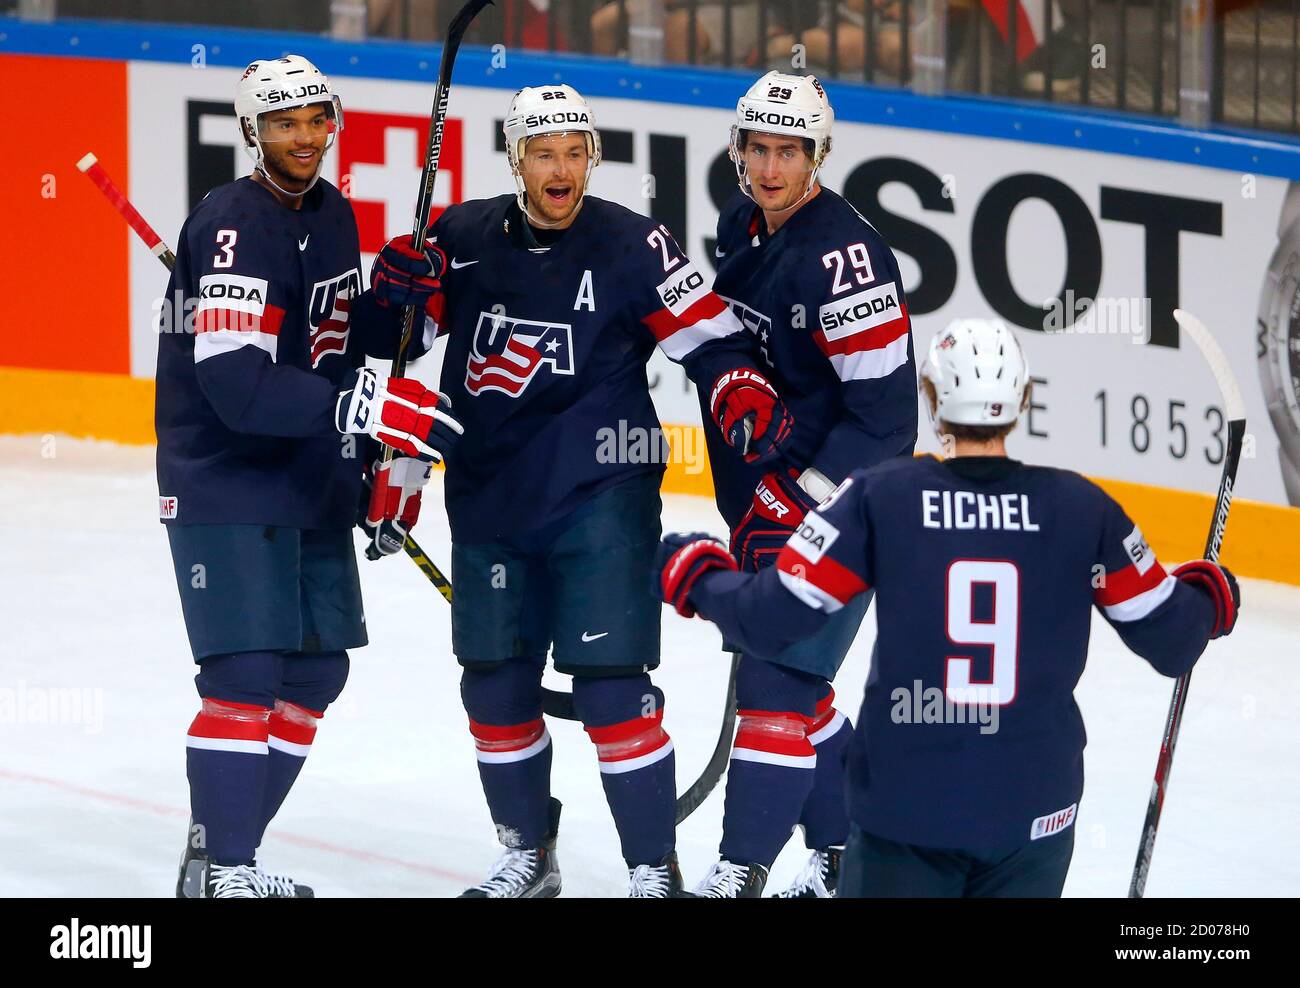 Trevor Lewis (C) of the U.S. celebrates with his teammates Seth Jones (L),  Brock Nelson and Jack Eichel (R) after scoring a goal against the Czech  Republic during their Ice Hockey World